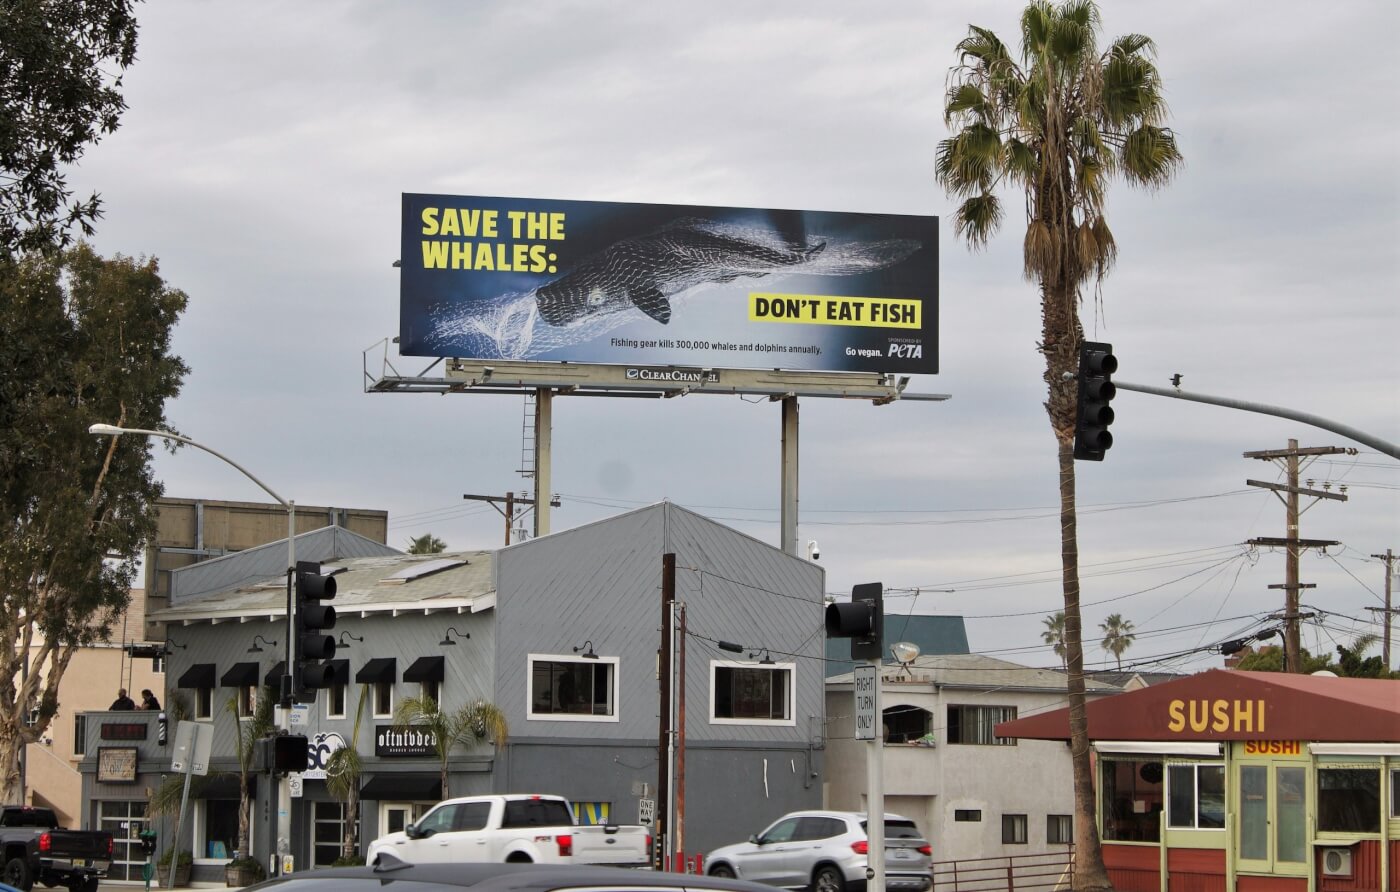 save the whales billboard in san diego, california